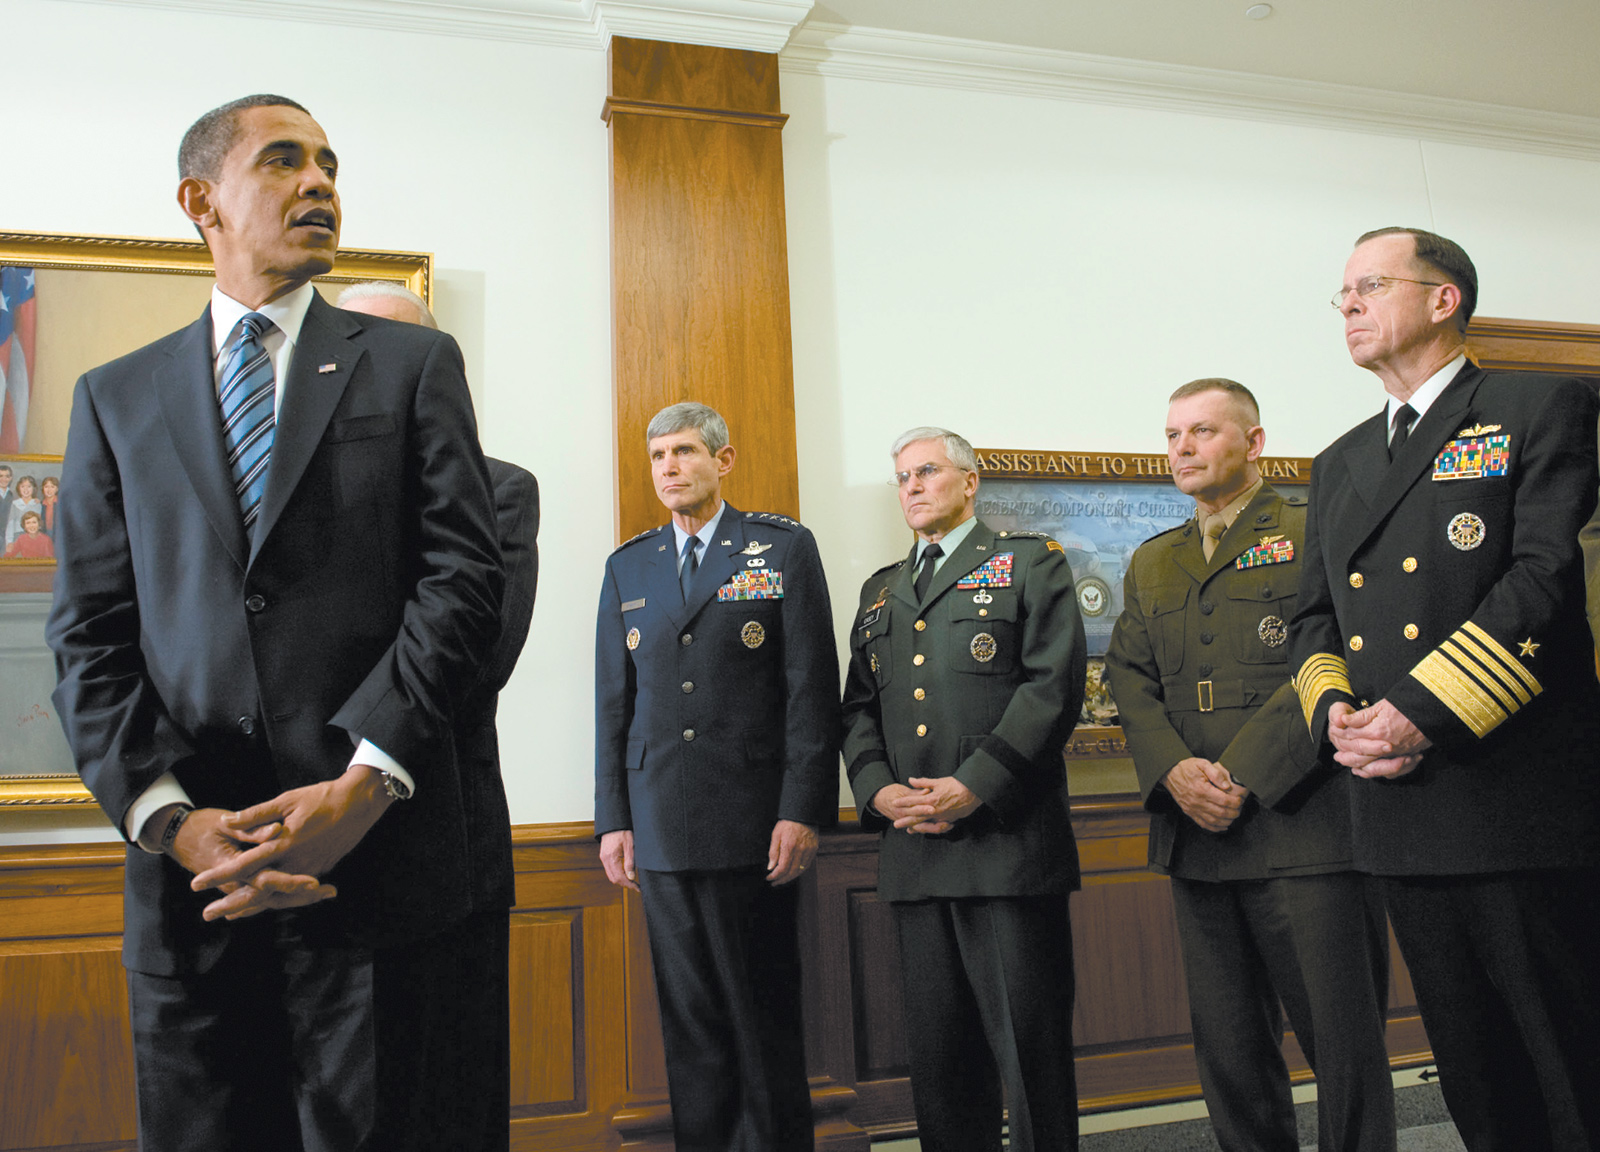 President Obama on his first visit to the Pentagon as commander in chief, January 2009. With him are, from left, Air Force Chief of Staff Norton Schwartz, Army Chief of Staff George Casey, Joint Chiefs of Staff Vice Chairman James Cartwright, and Joint Chiefs of Staff Chairman Mike Mullen.